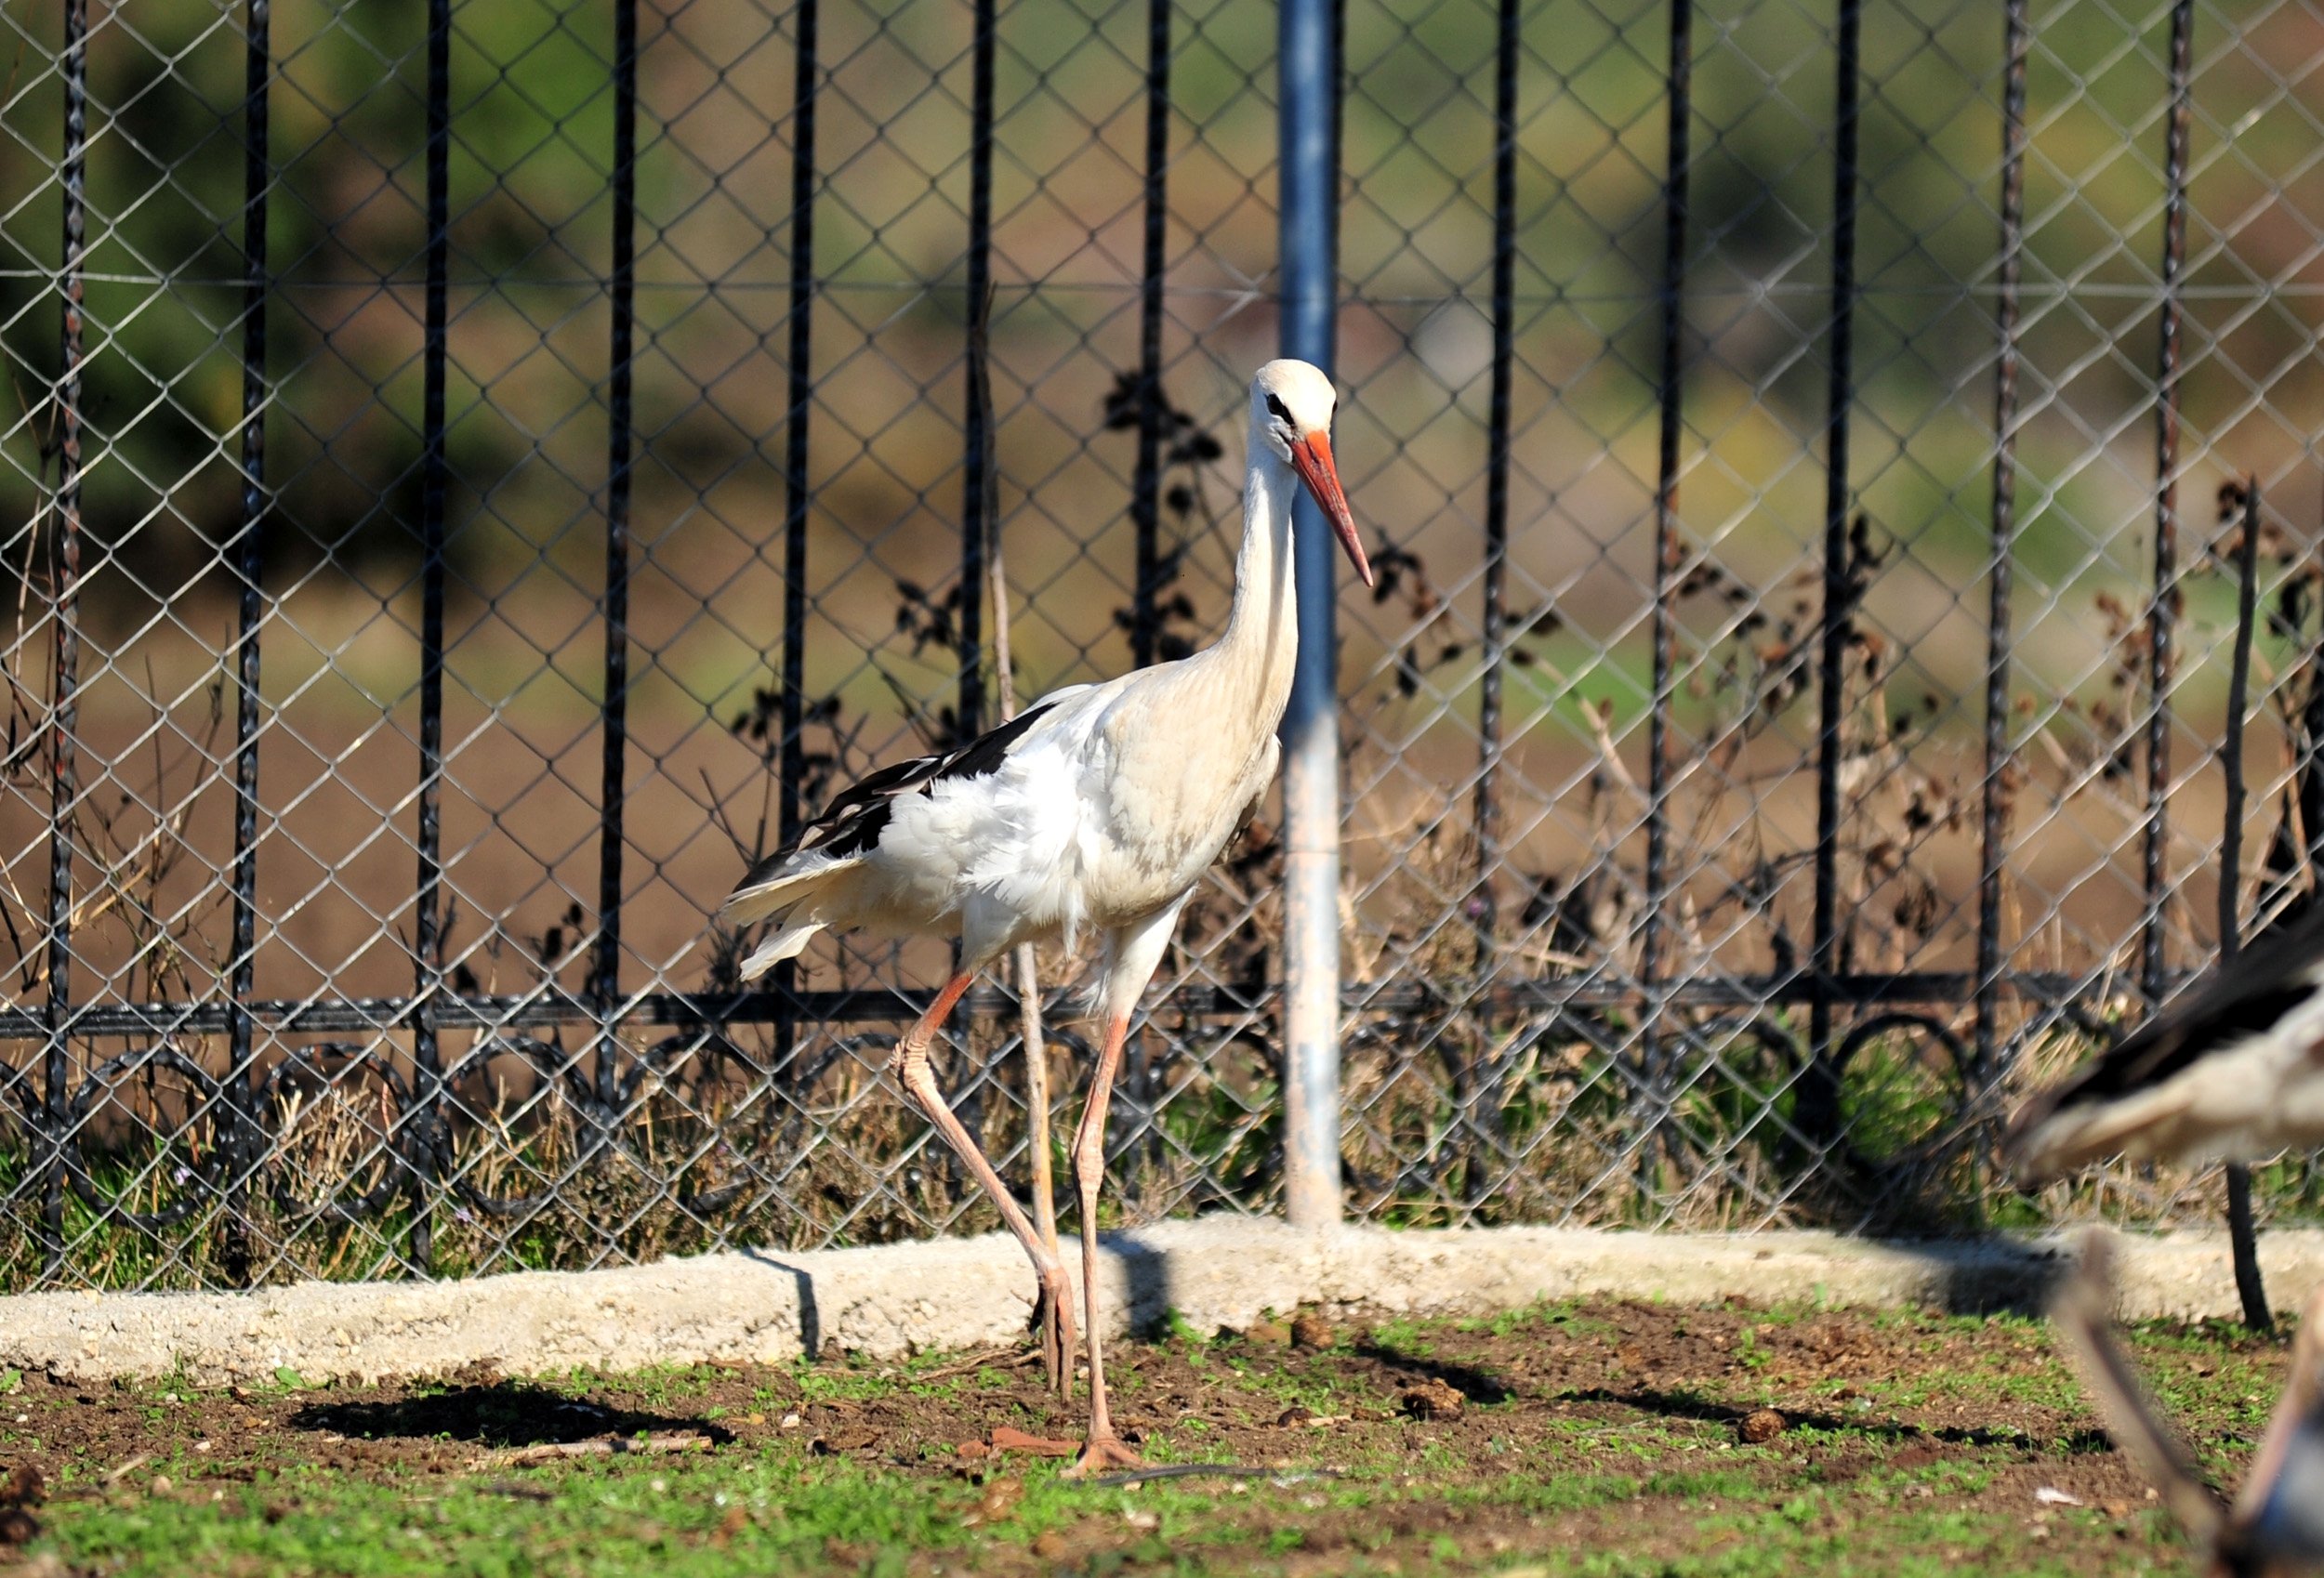 One of the rescued storks at the Animal Rights Federation (HAYTAP) 'Retired Animals Farm' in Bursa, Turkey, Nov. 10, 2021. (DHA Photo)